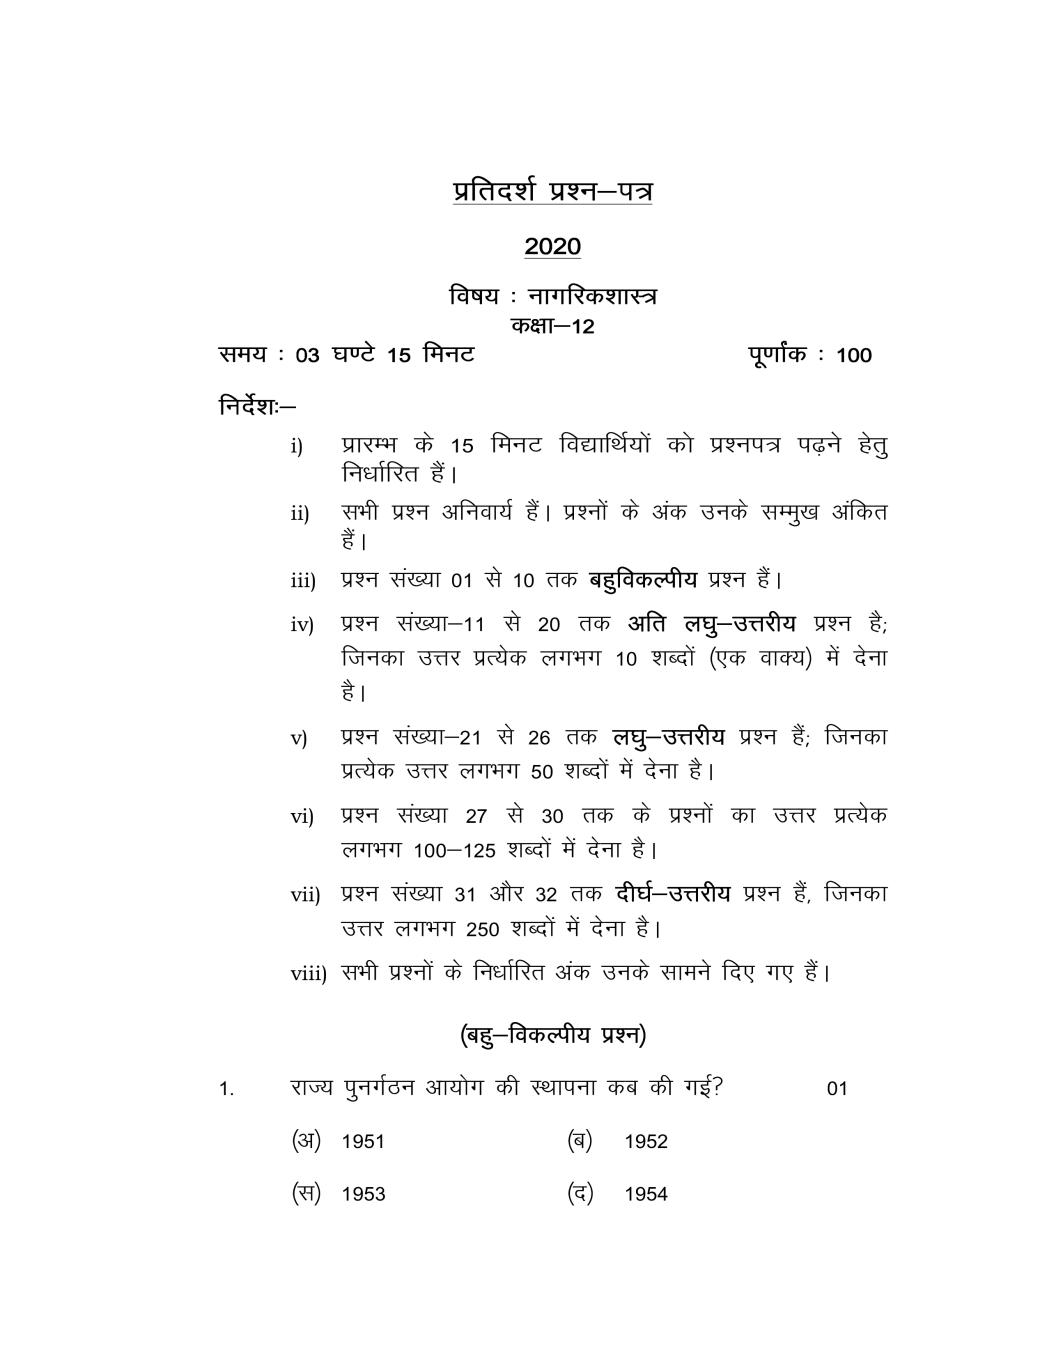 UP Board Class 12 Model Paper 2020 CIVICS - Page 1